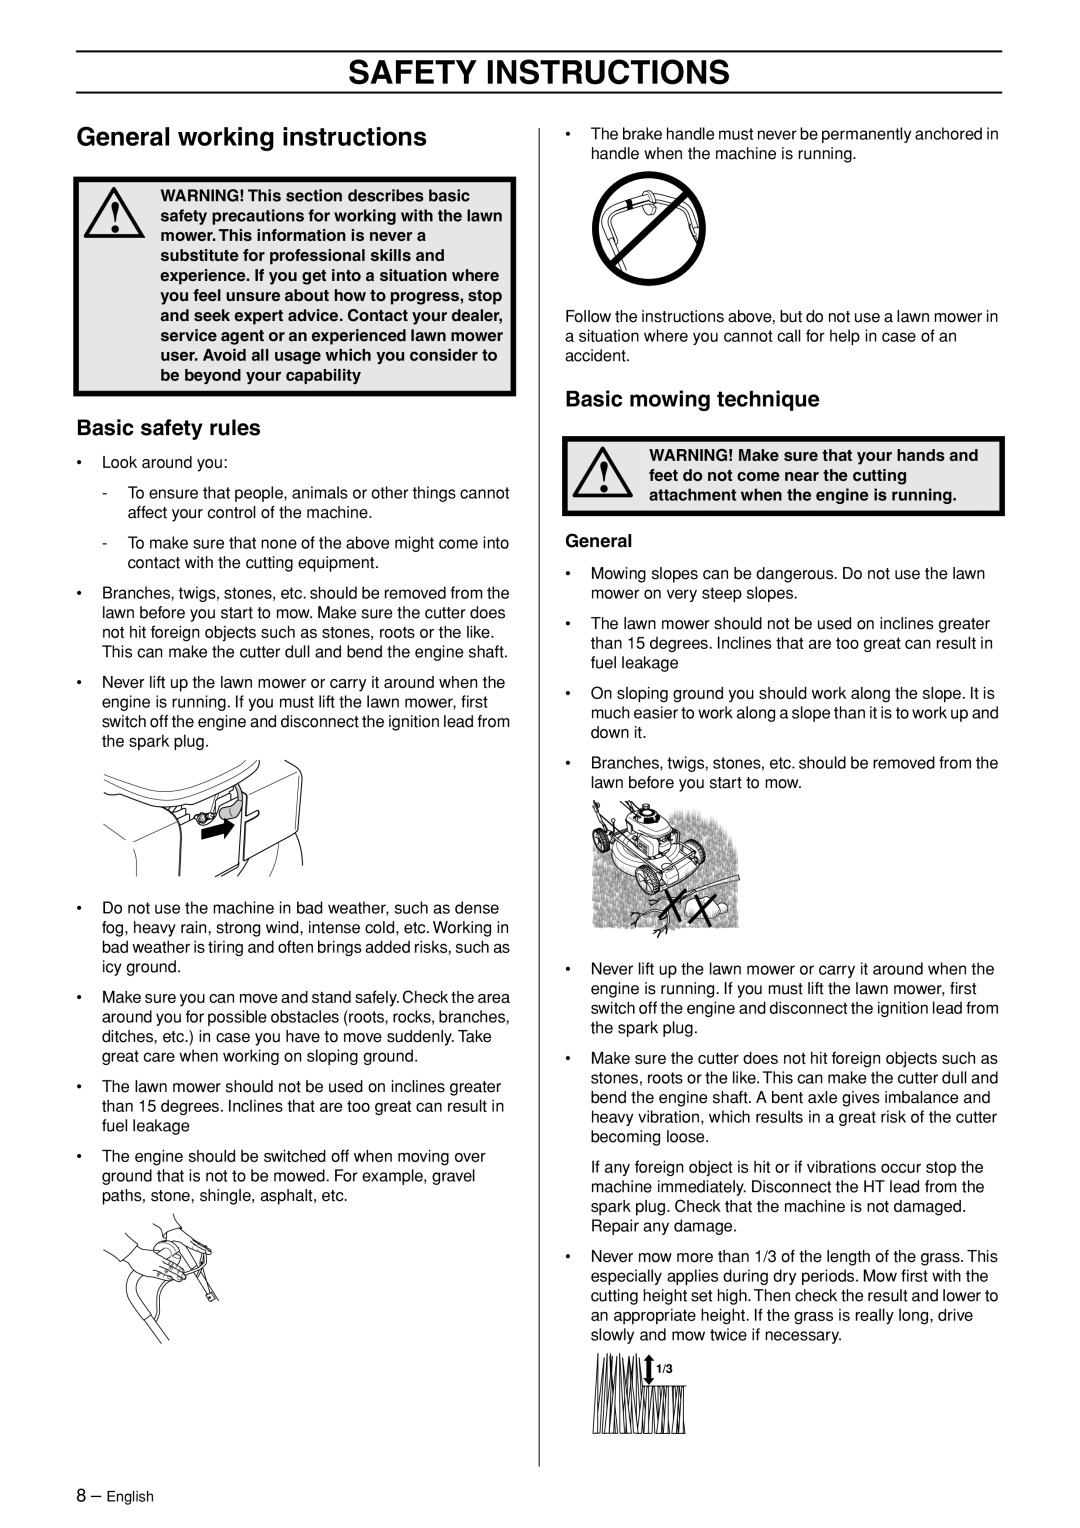 Husqvarna M48 Pro, M53 S Pro General working instructions, Basic safety rules, Basic mowing technique, Safety Instructions 